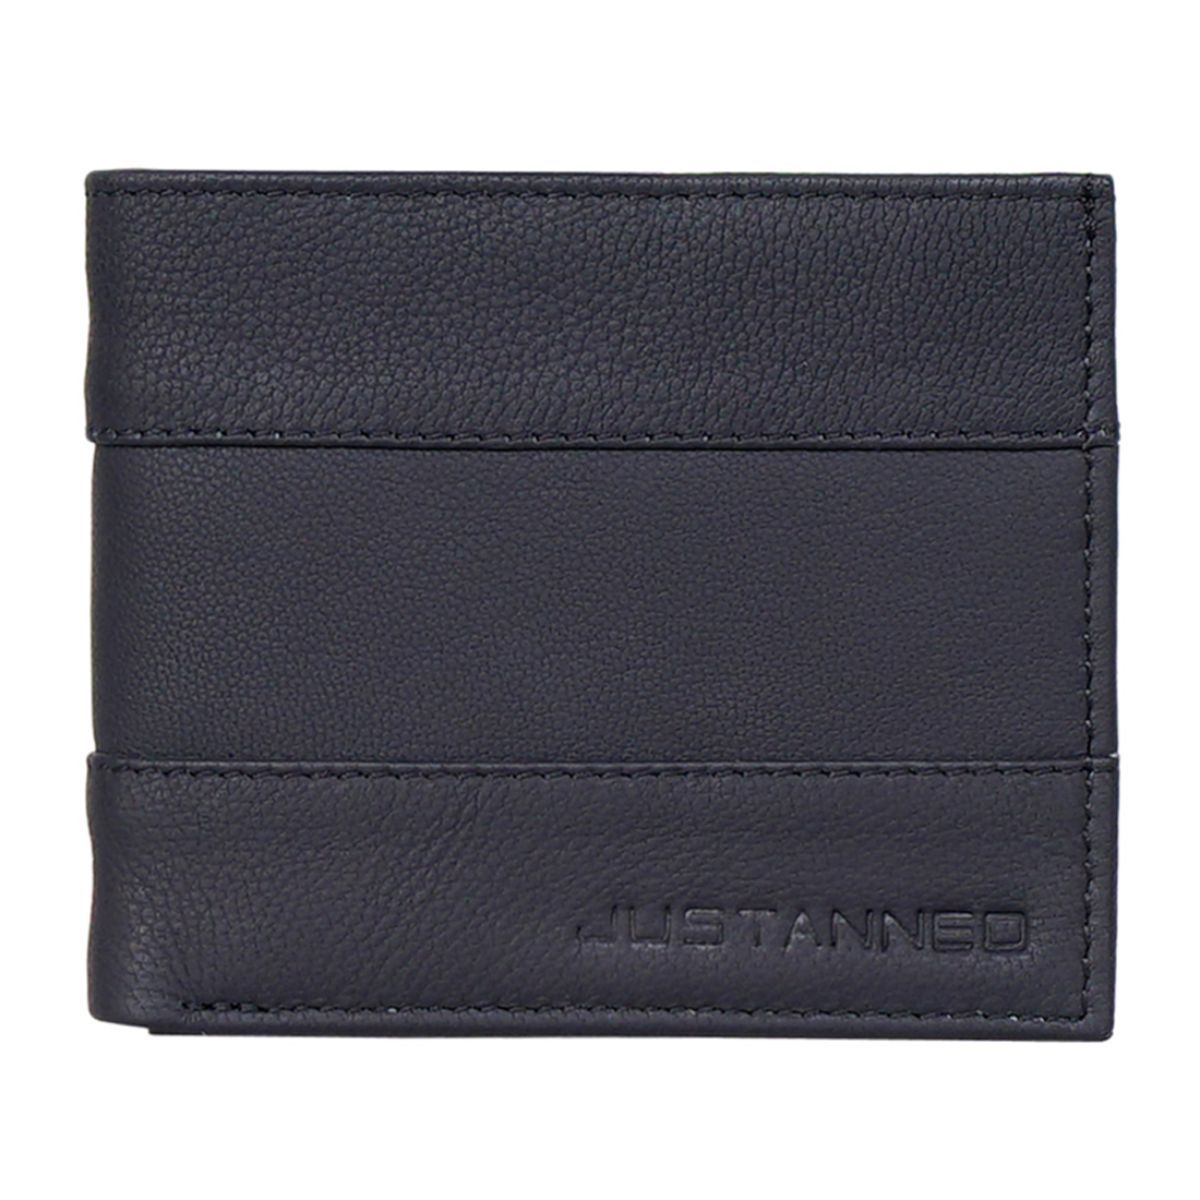 Justanned Men'S Leather Sturdy Wallet